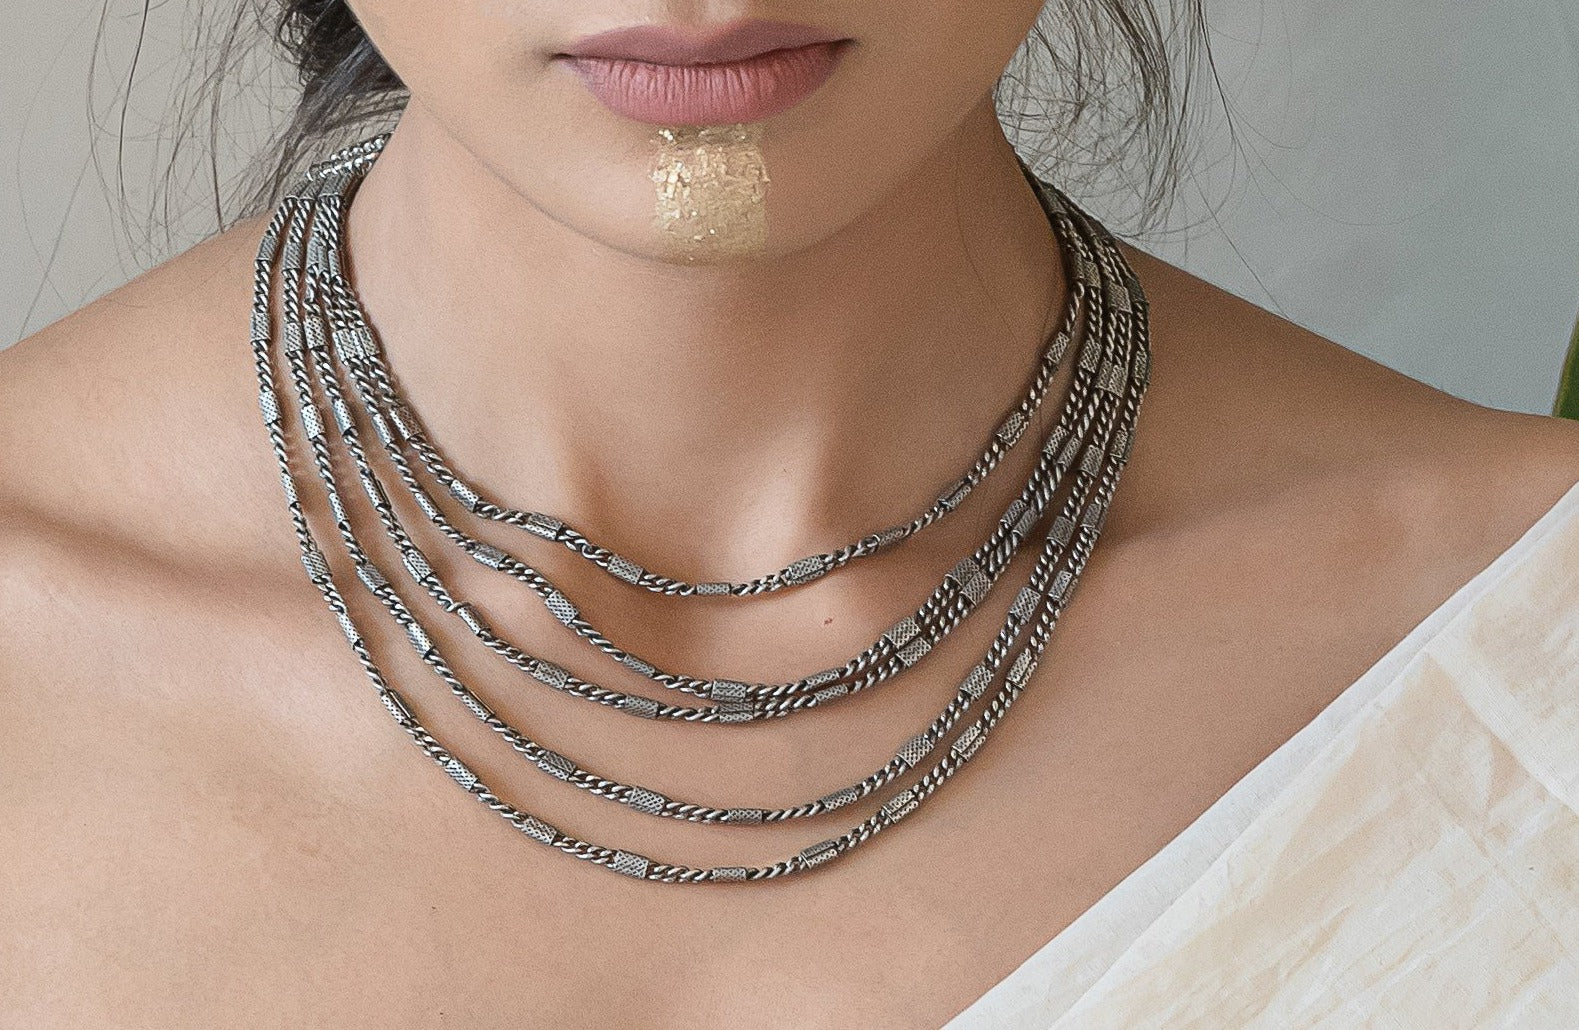 TIARA FANNA NECKLACE by Newly Launched SILSILA Collection